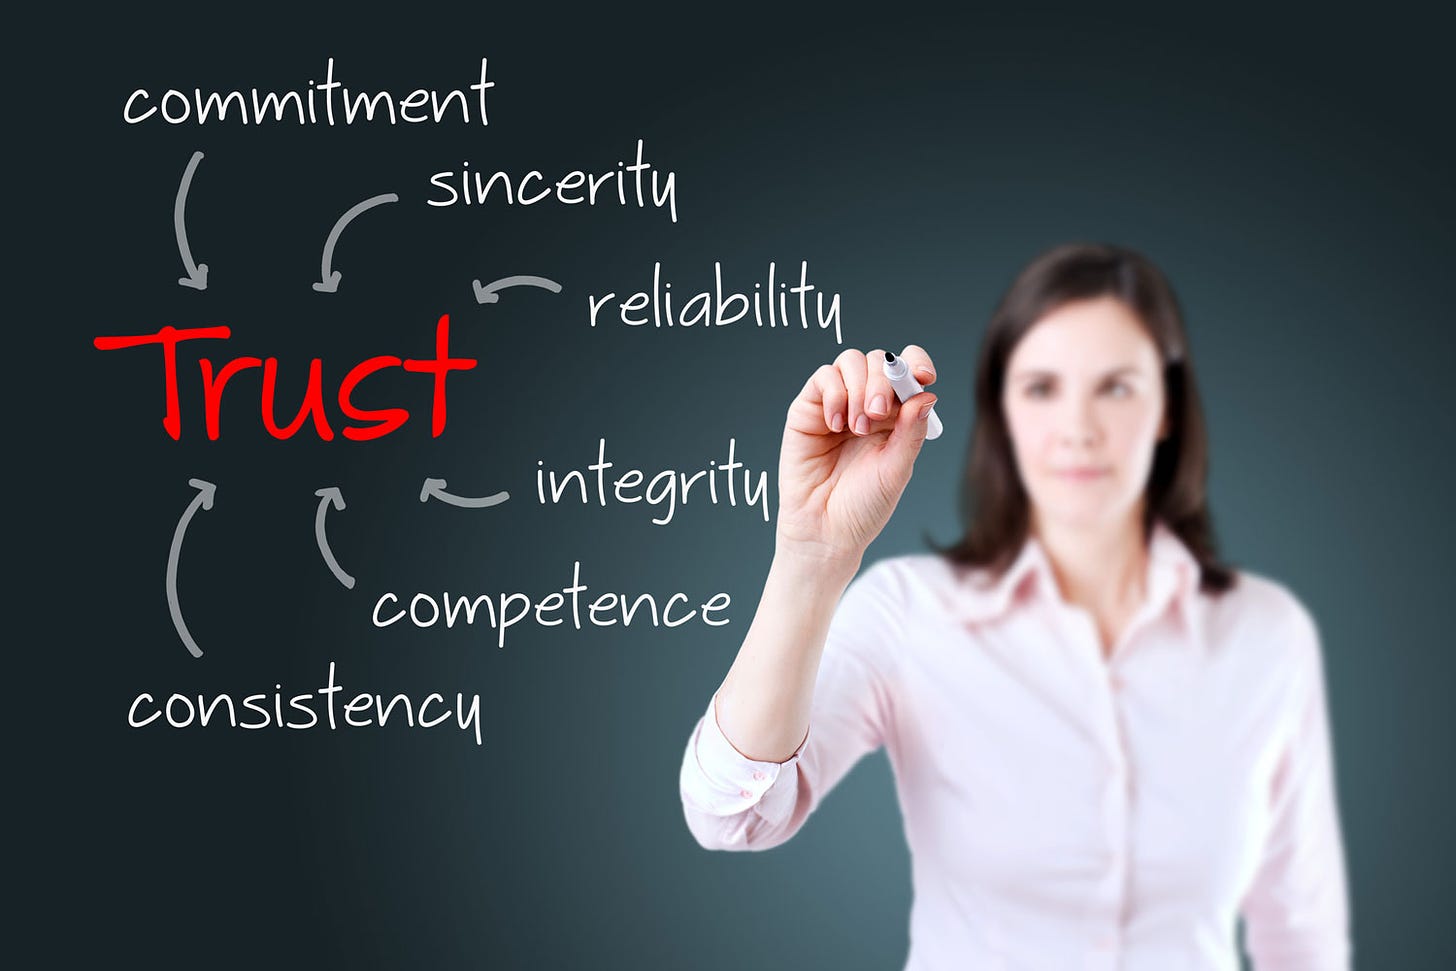 Quick tips on how to build trust in teams